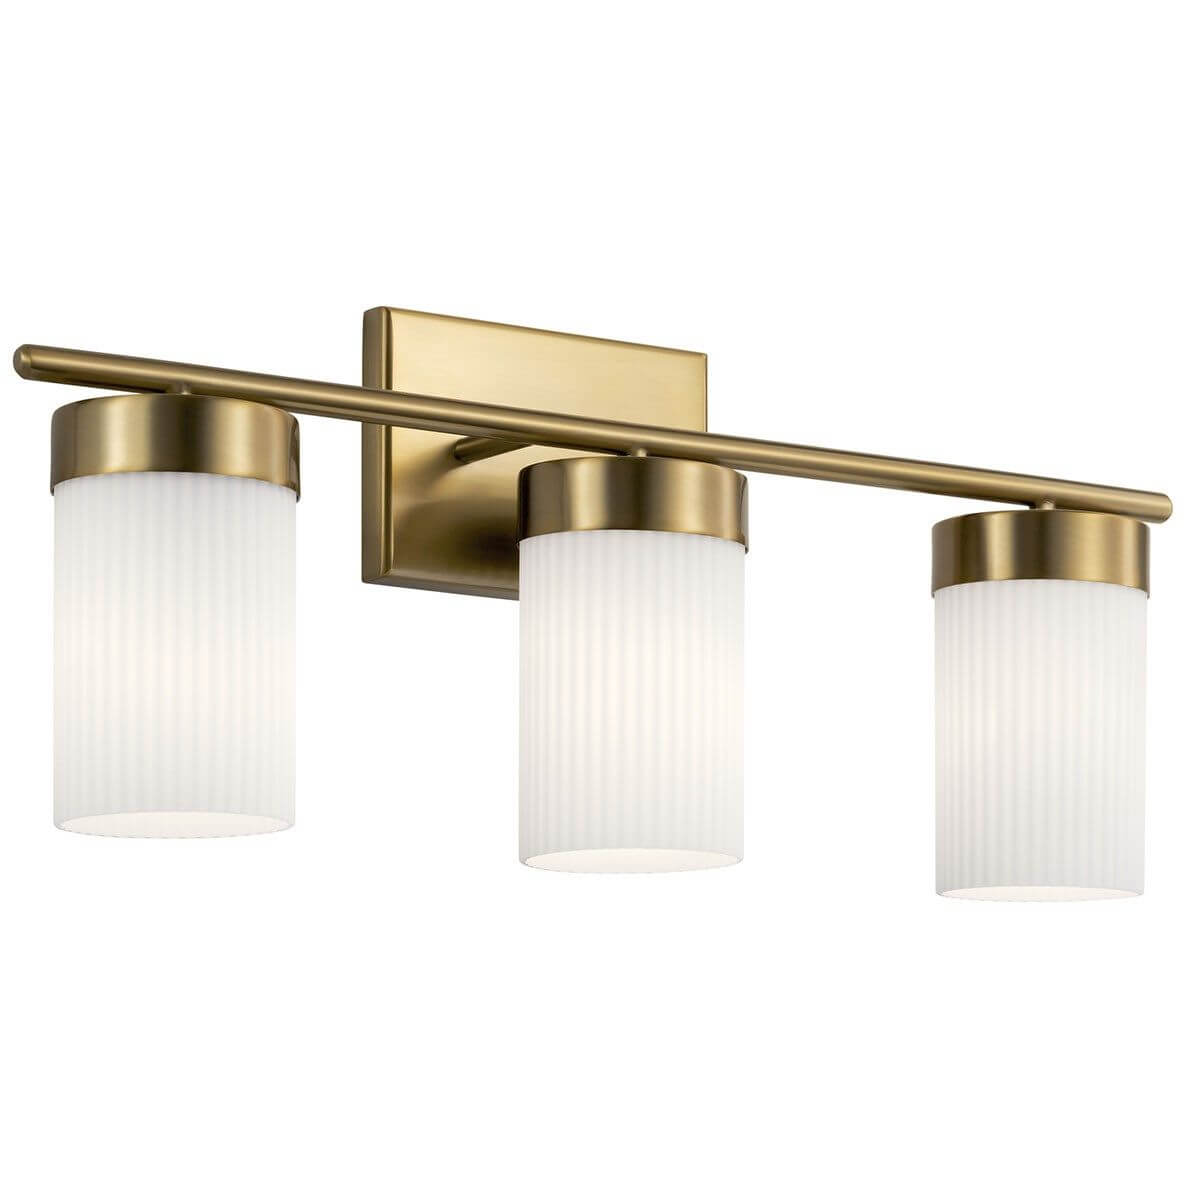 Wisterial 24 inch Vanity Light - 3 Light - Brushed Natural Brass